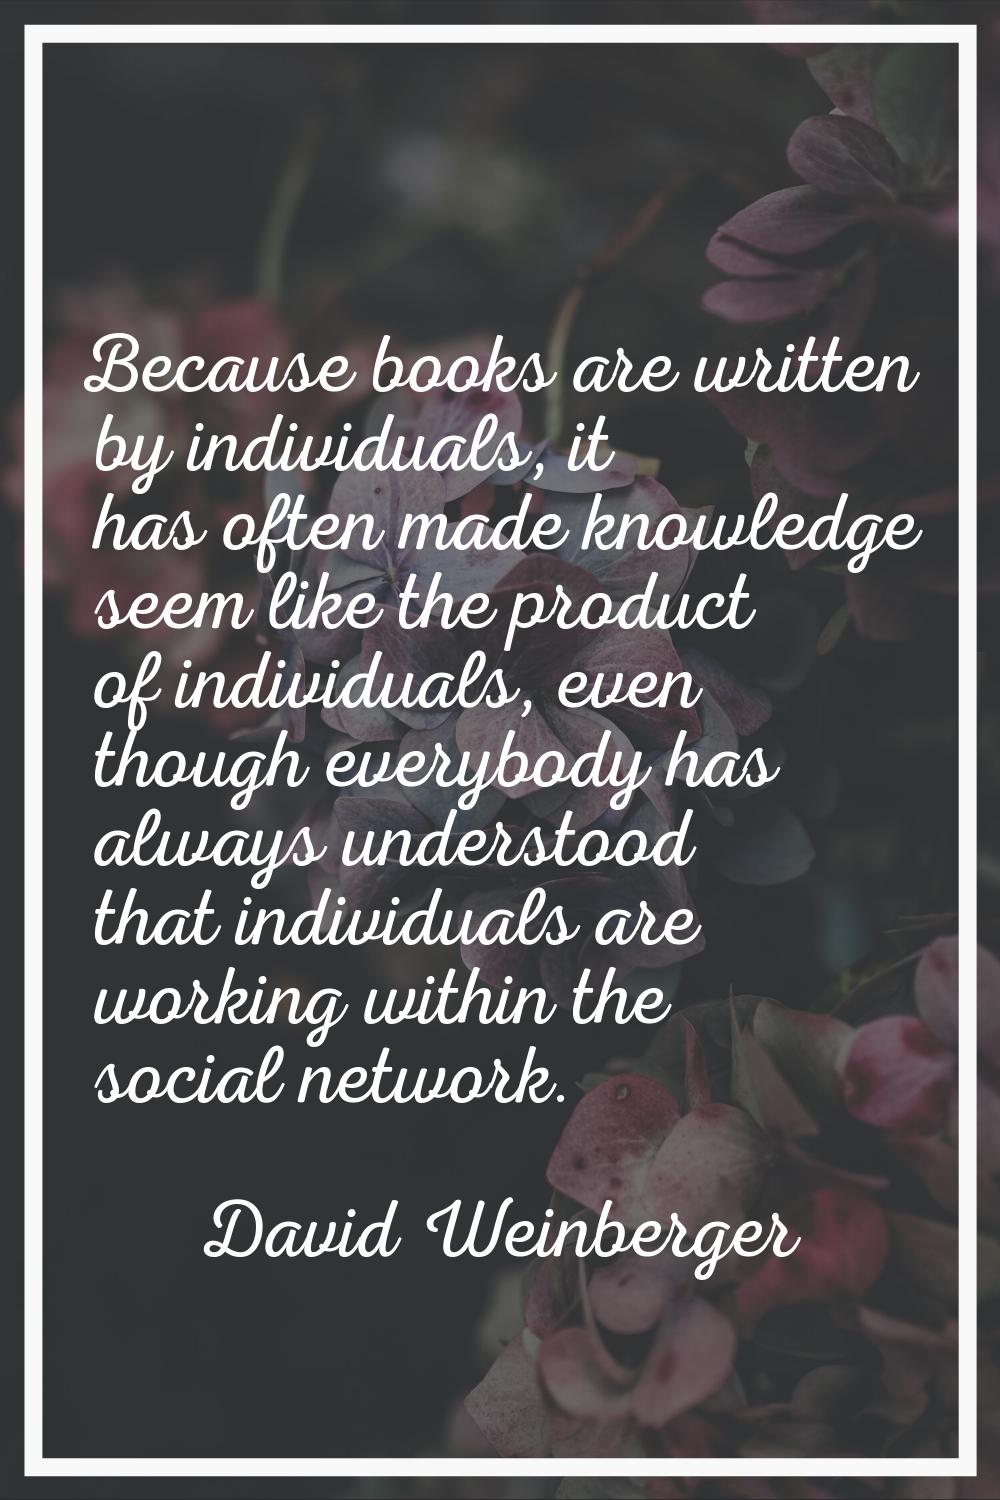 Because books are written by individuals, it has often made knowledge seem like the product of indi